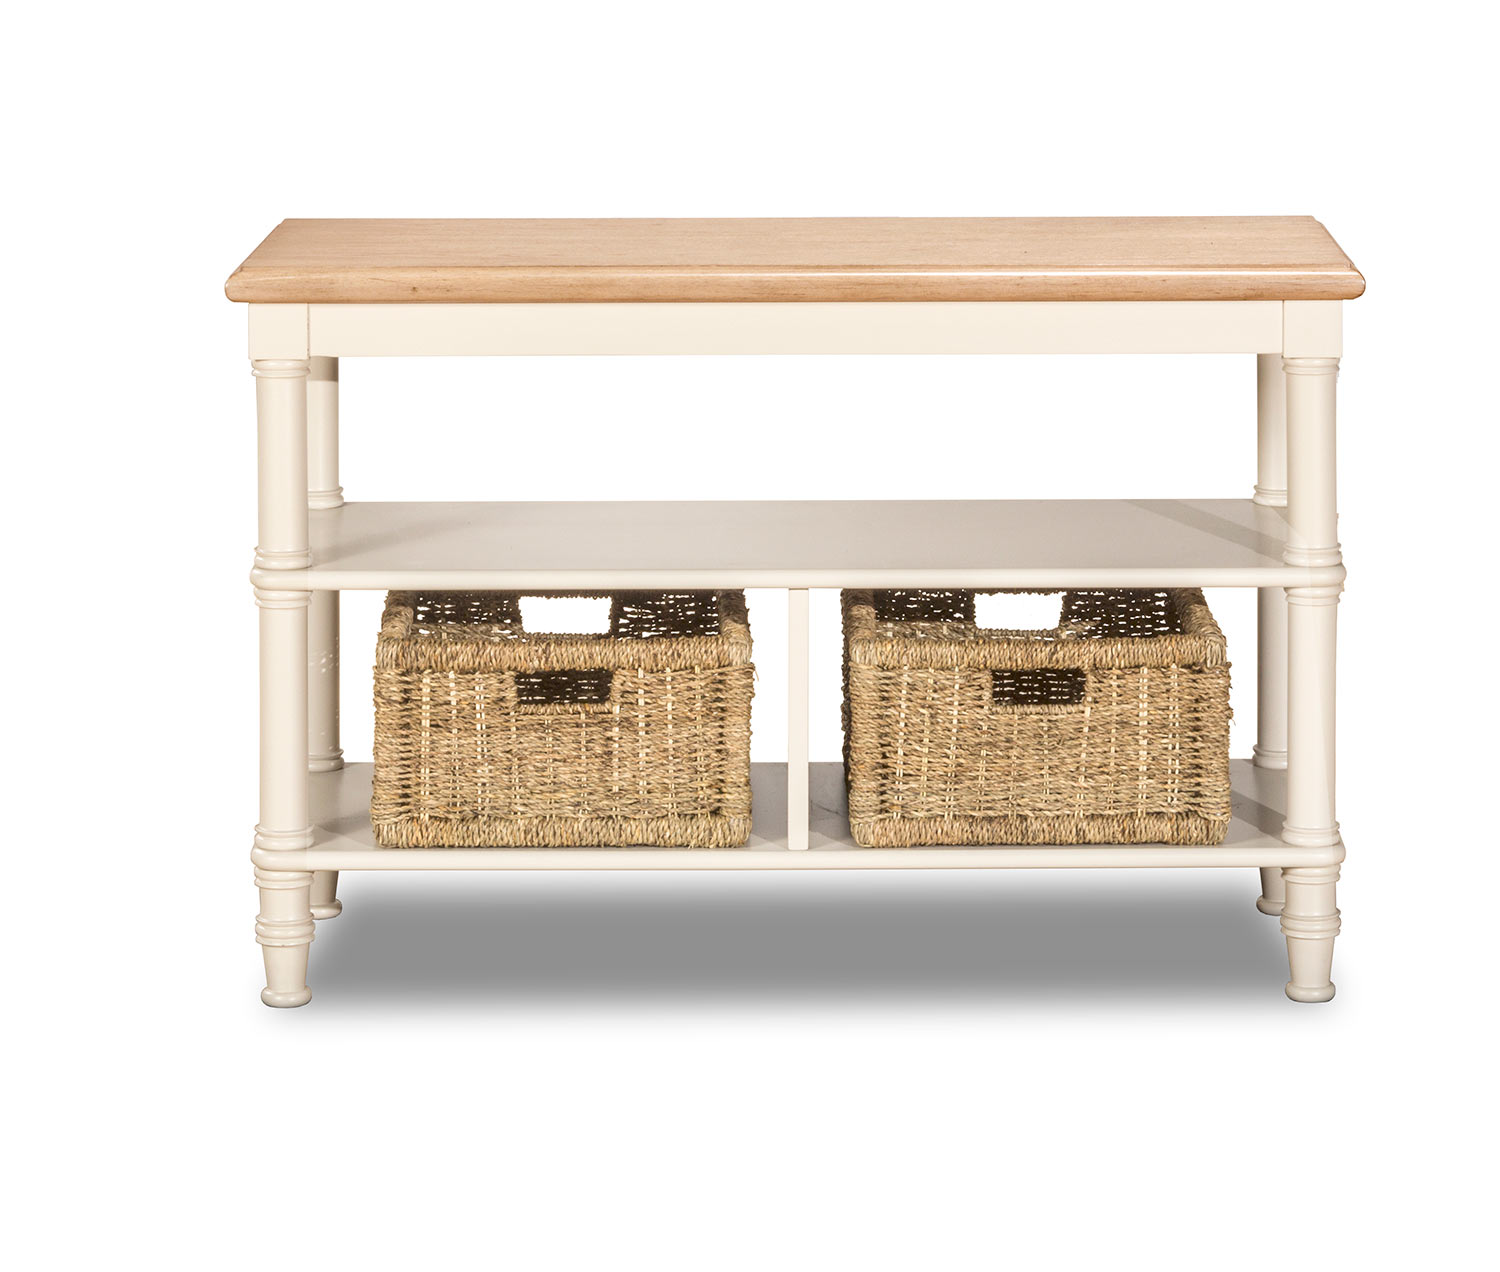 Hillsdale Seneca Basket Stand with 2 Baskets - Driftwood/Sea White/Natural Seagrass